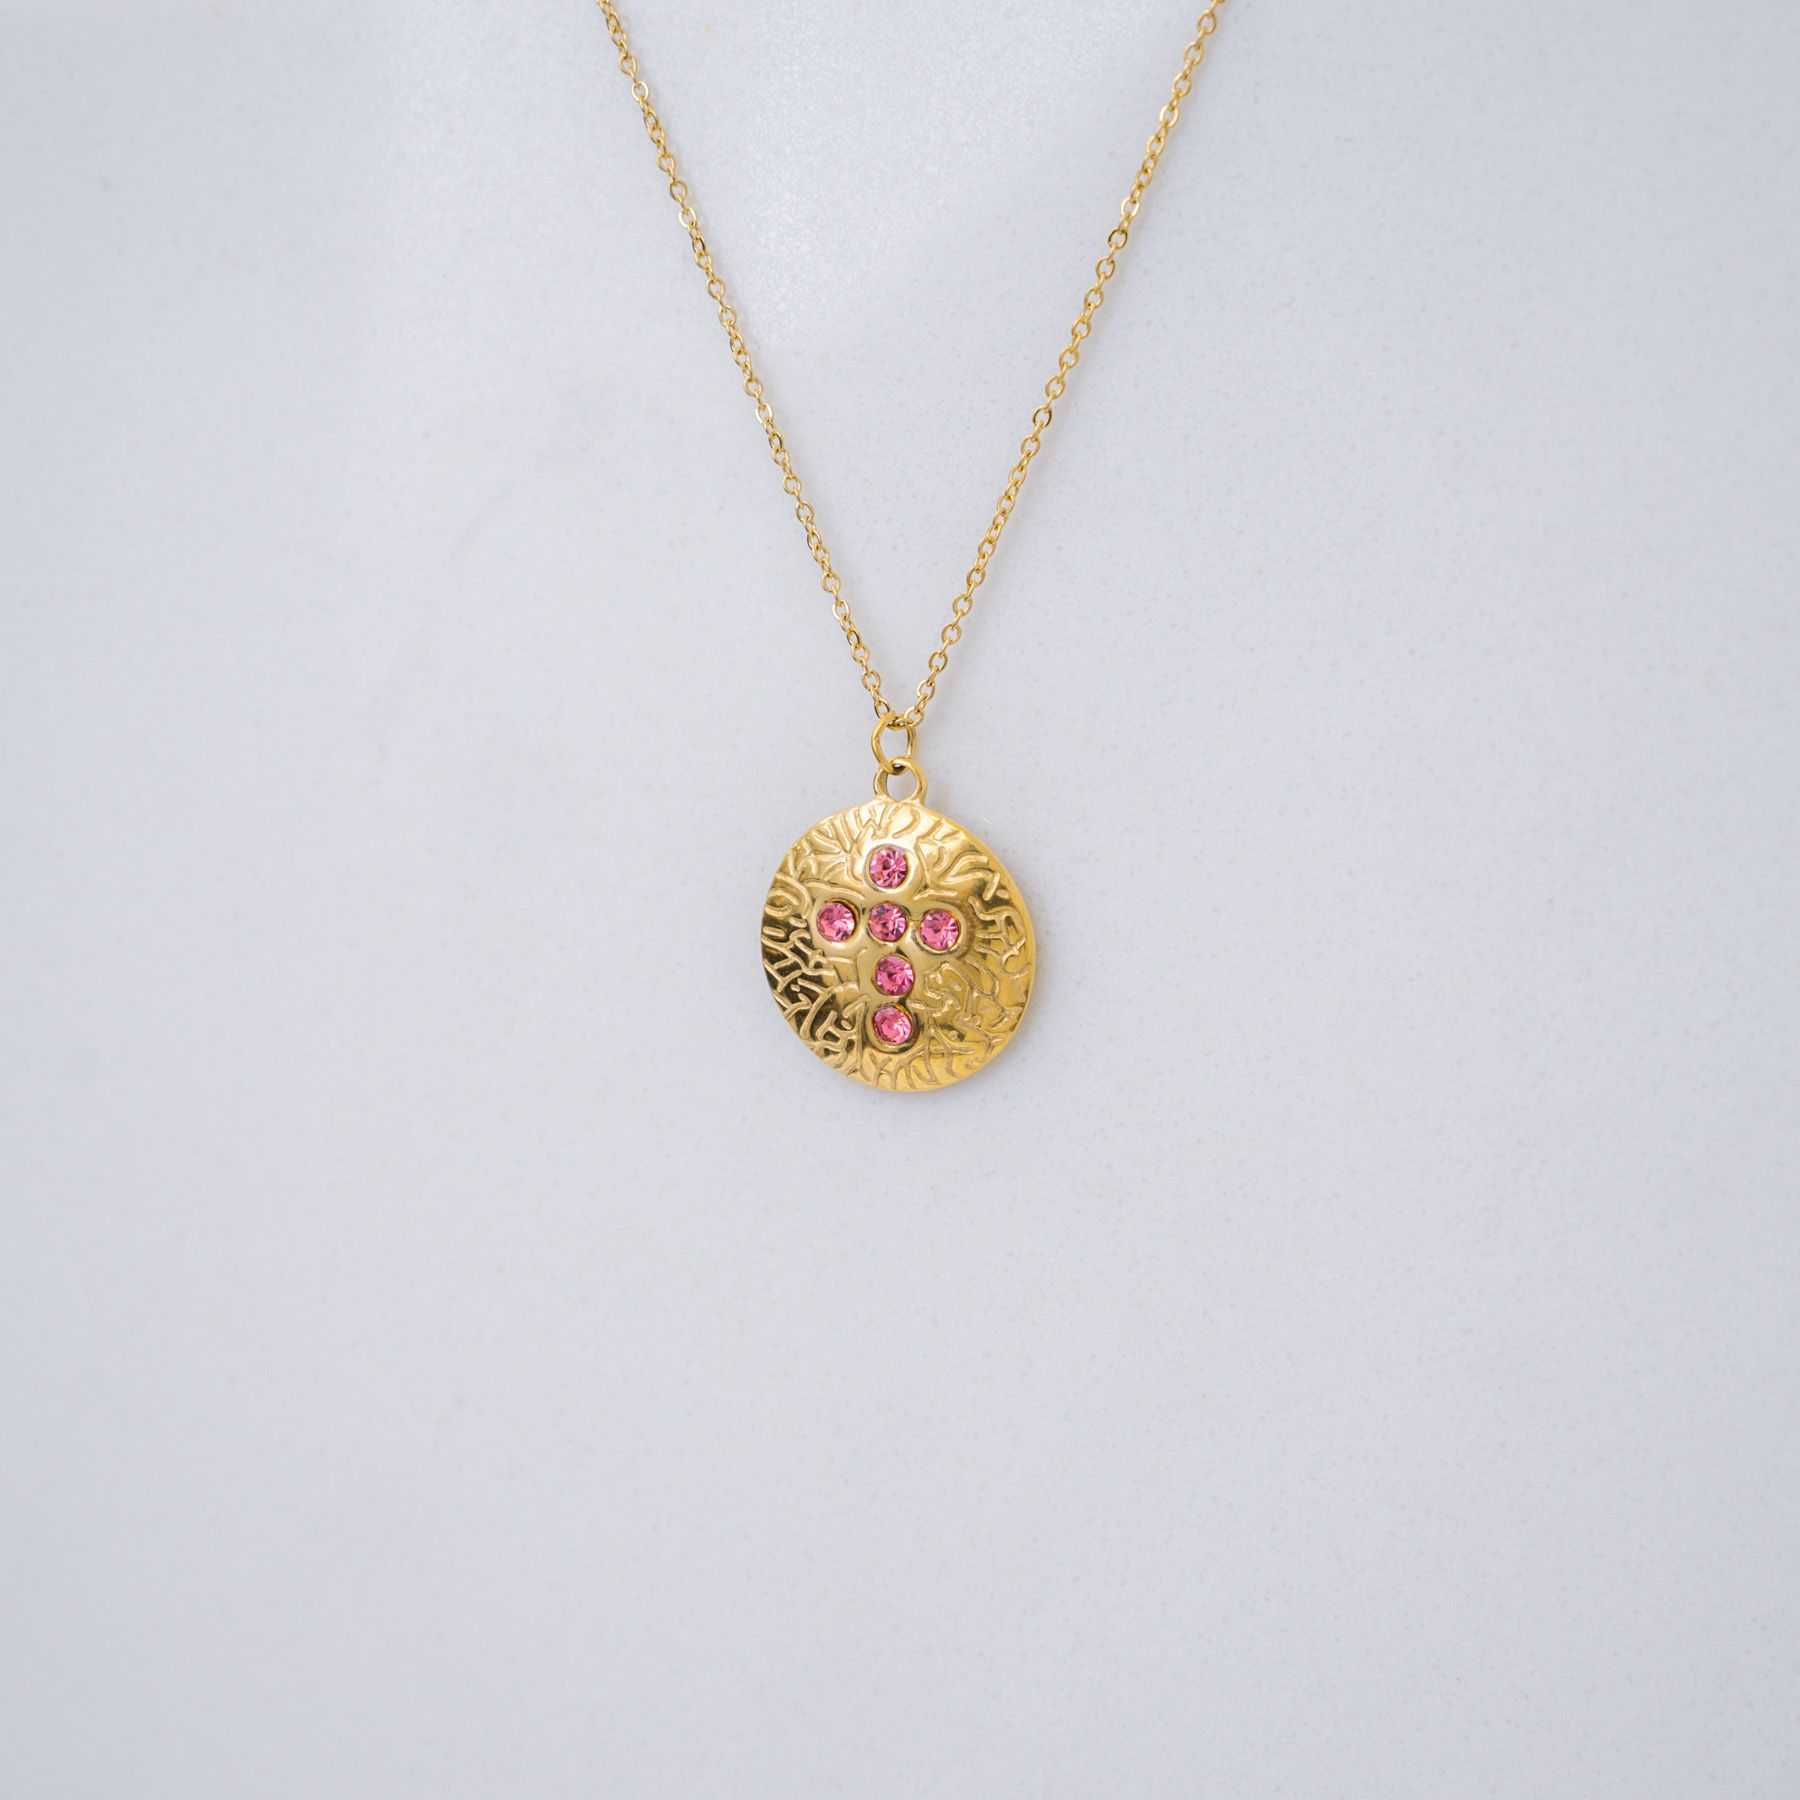 CROSS NECKLACE - GOLD & PINK